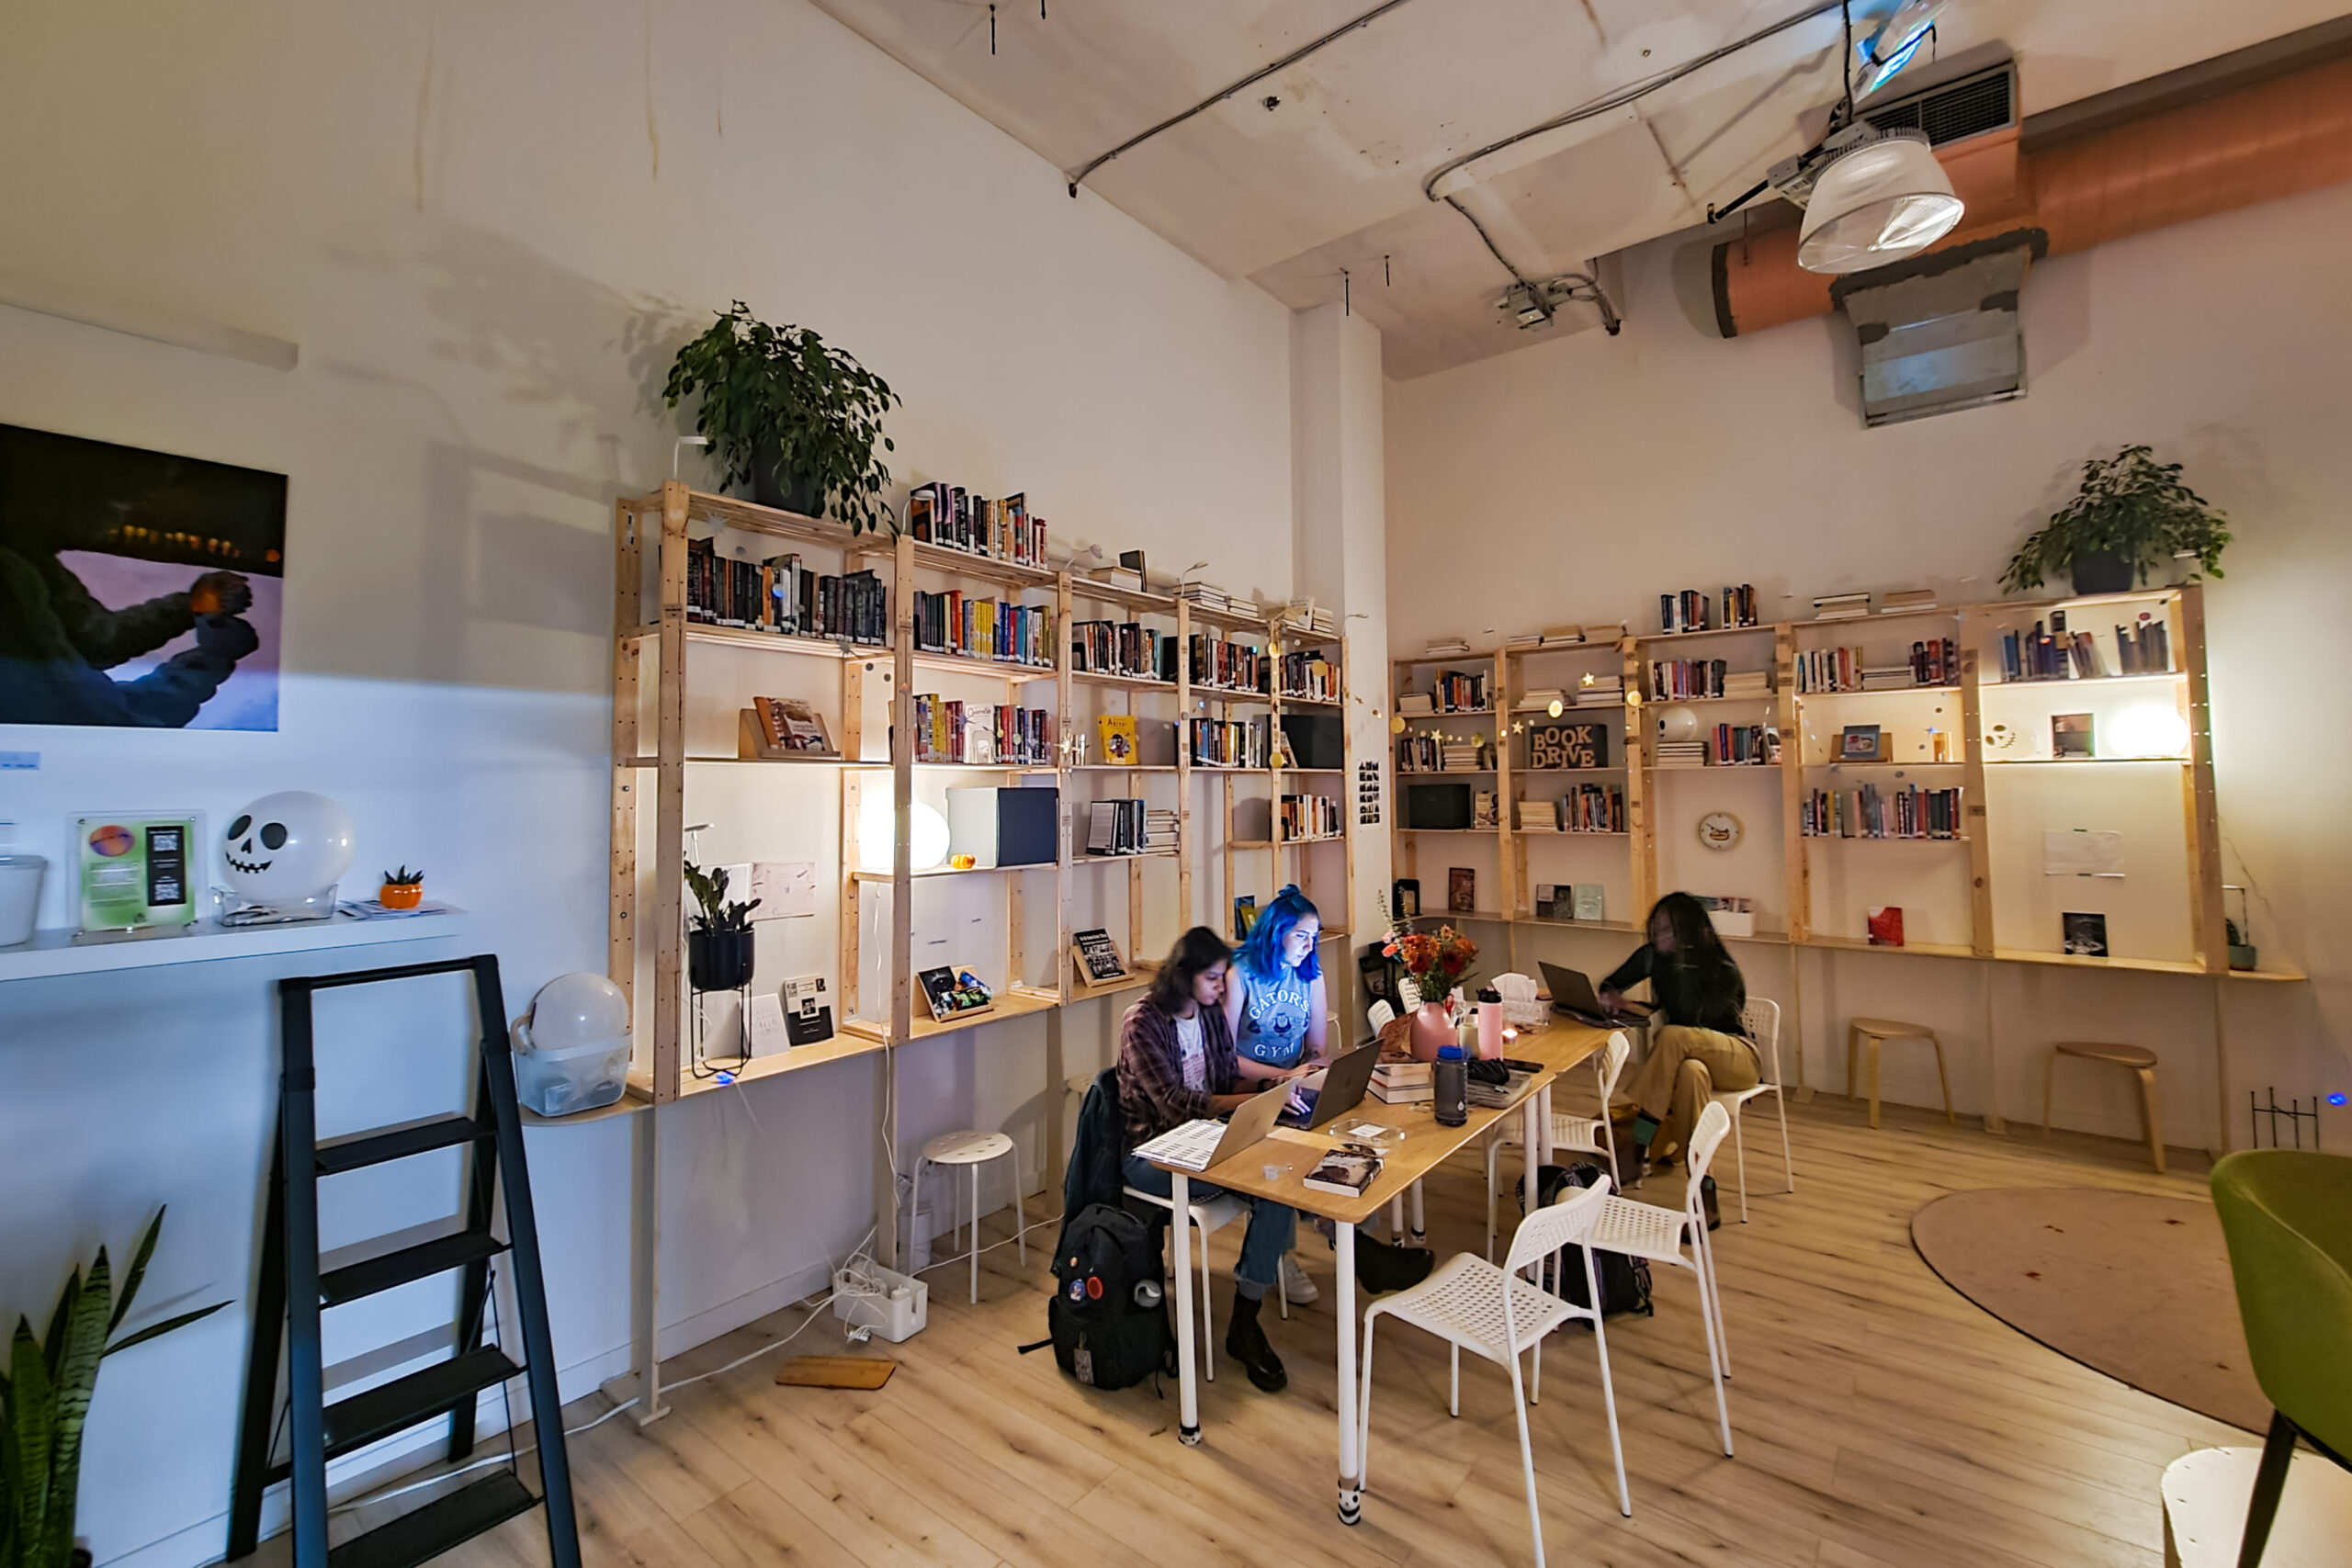 the interior of Vancouver Black Library: People working with their laptops on a table in the middle of a lofty room with book shelves against the walls, plants, and cozy lighting